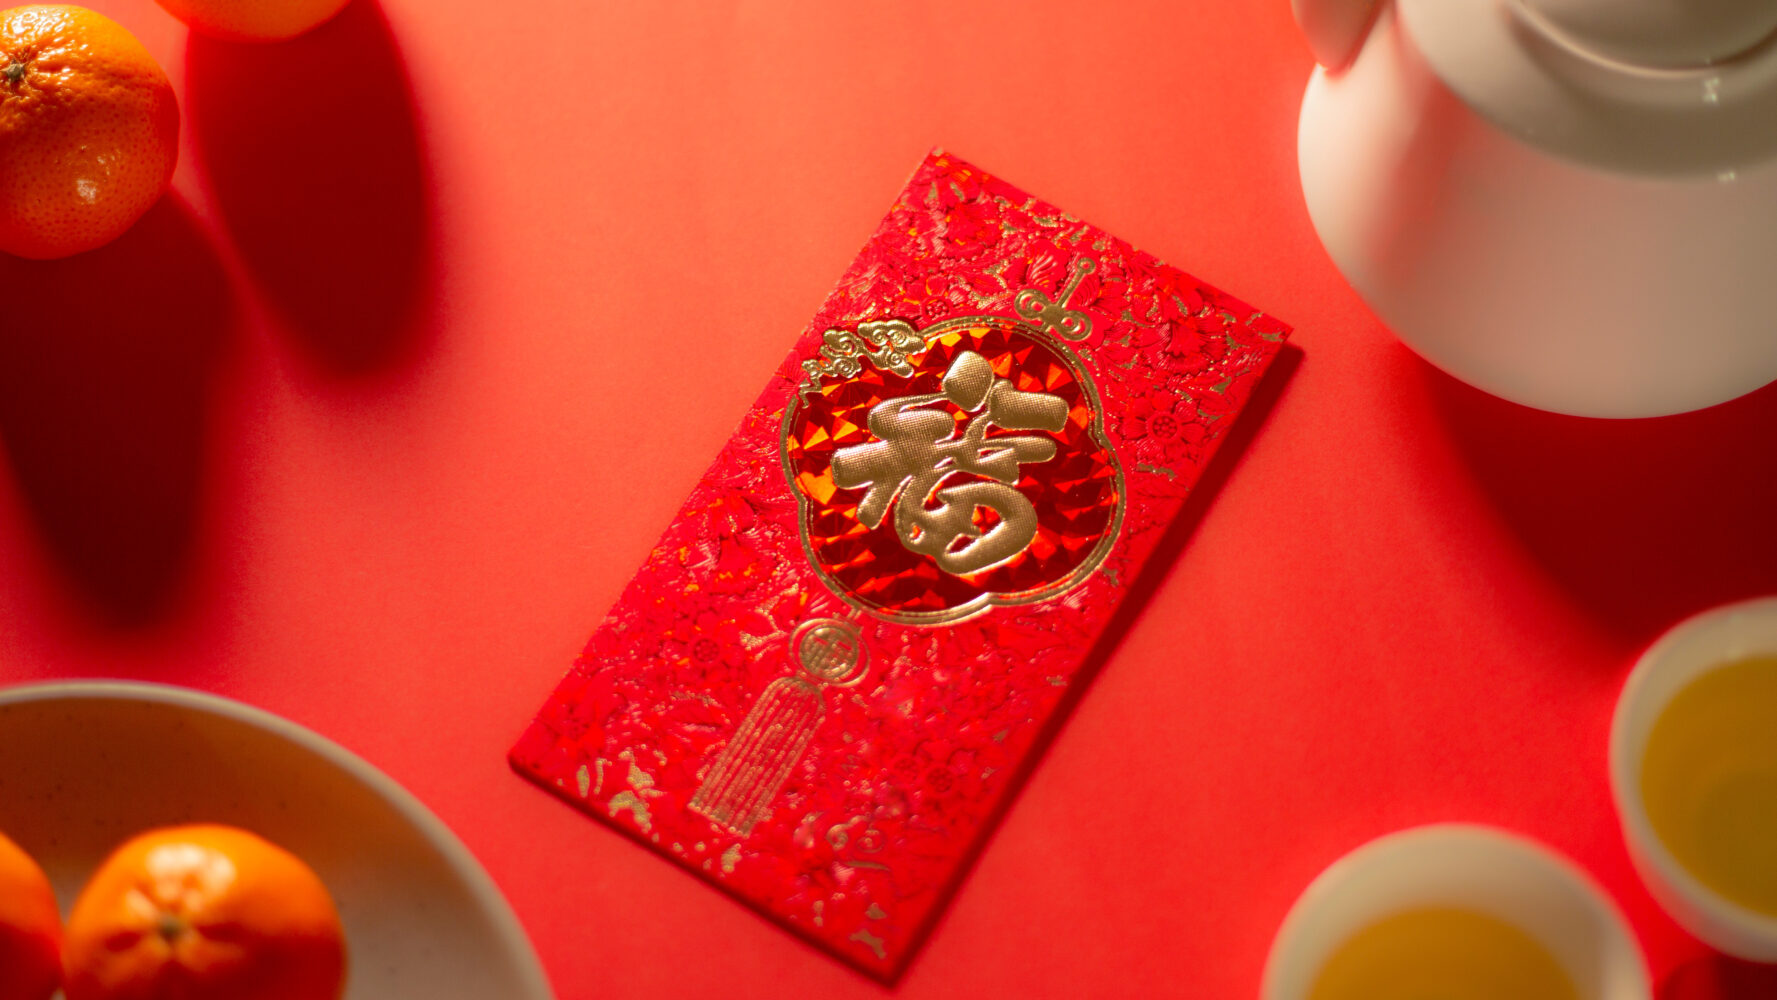 A red envelope